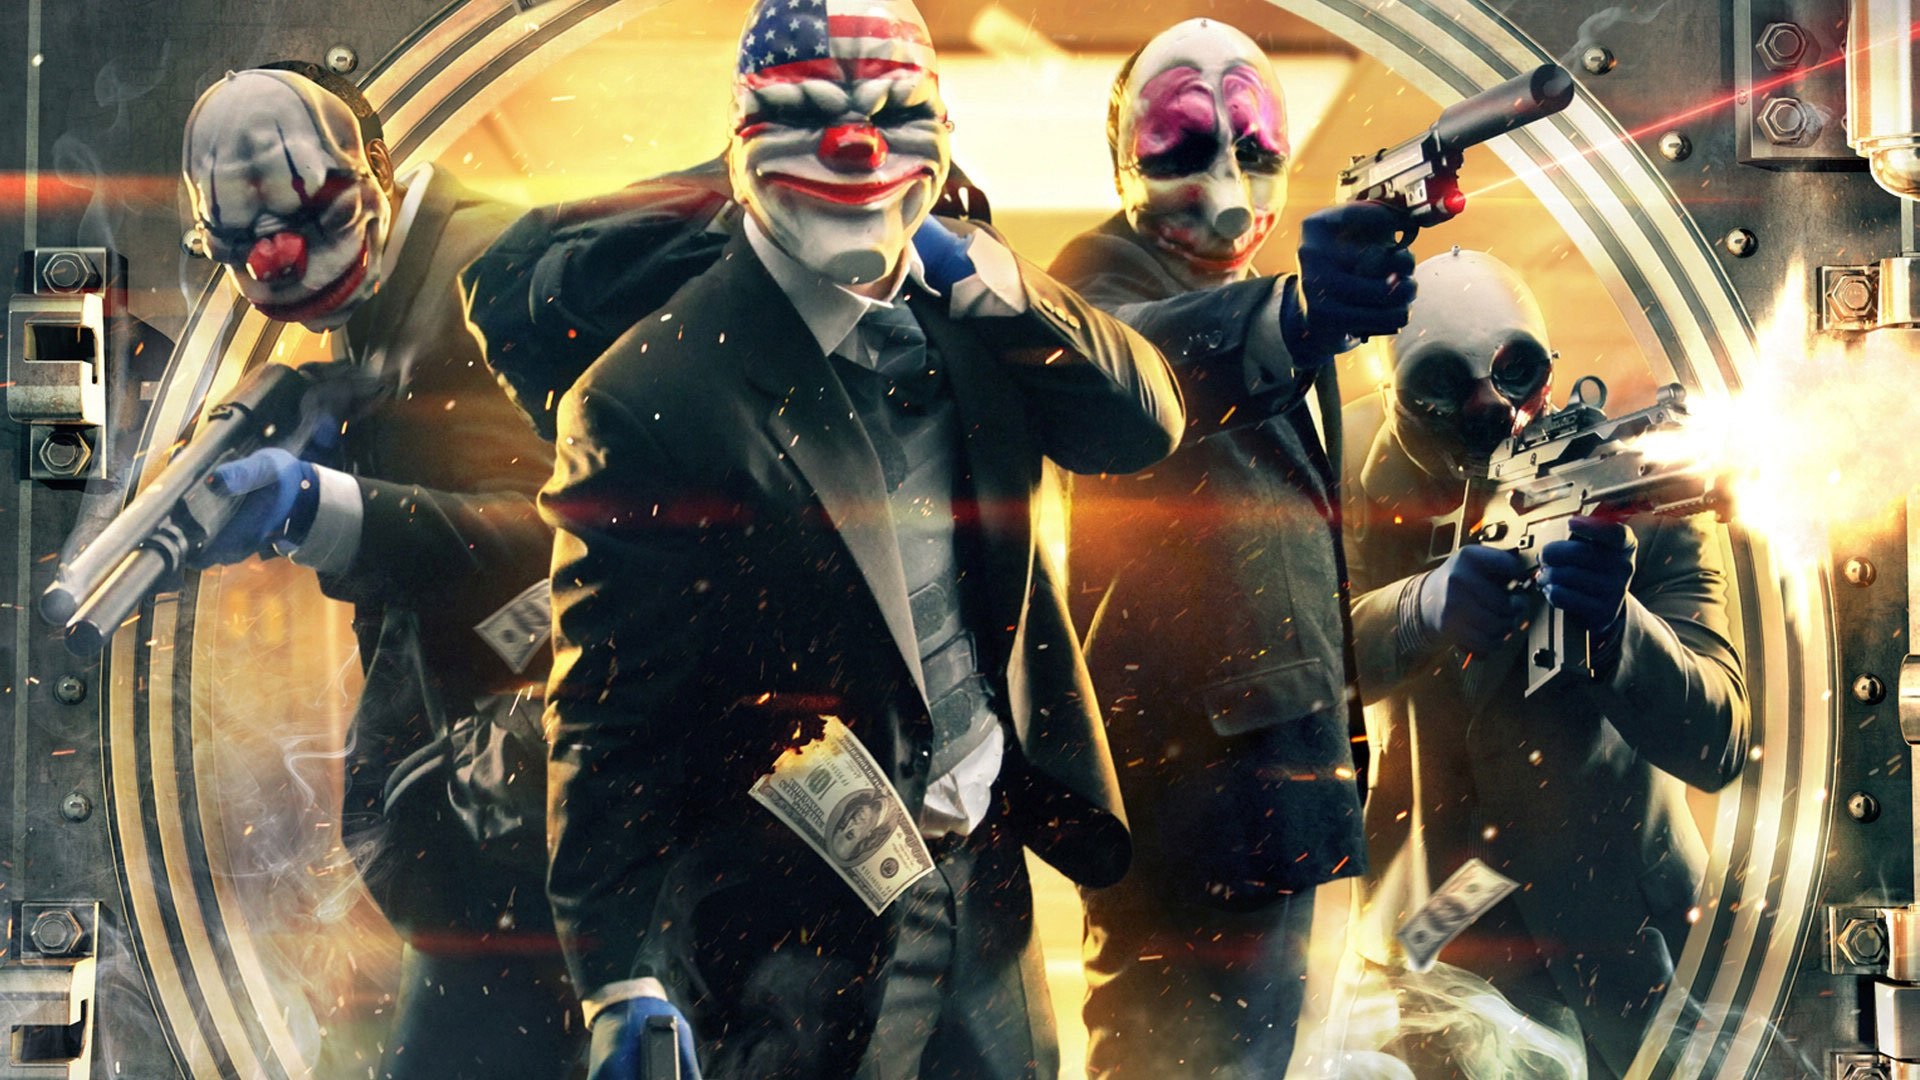 Grab Payday 2, a great Diablo-like, and 13 other goodies for $8.99 and support charity